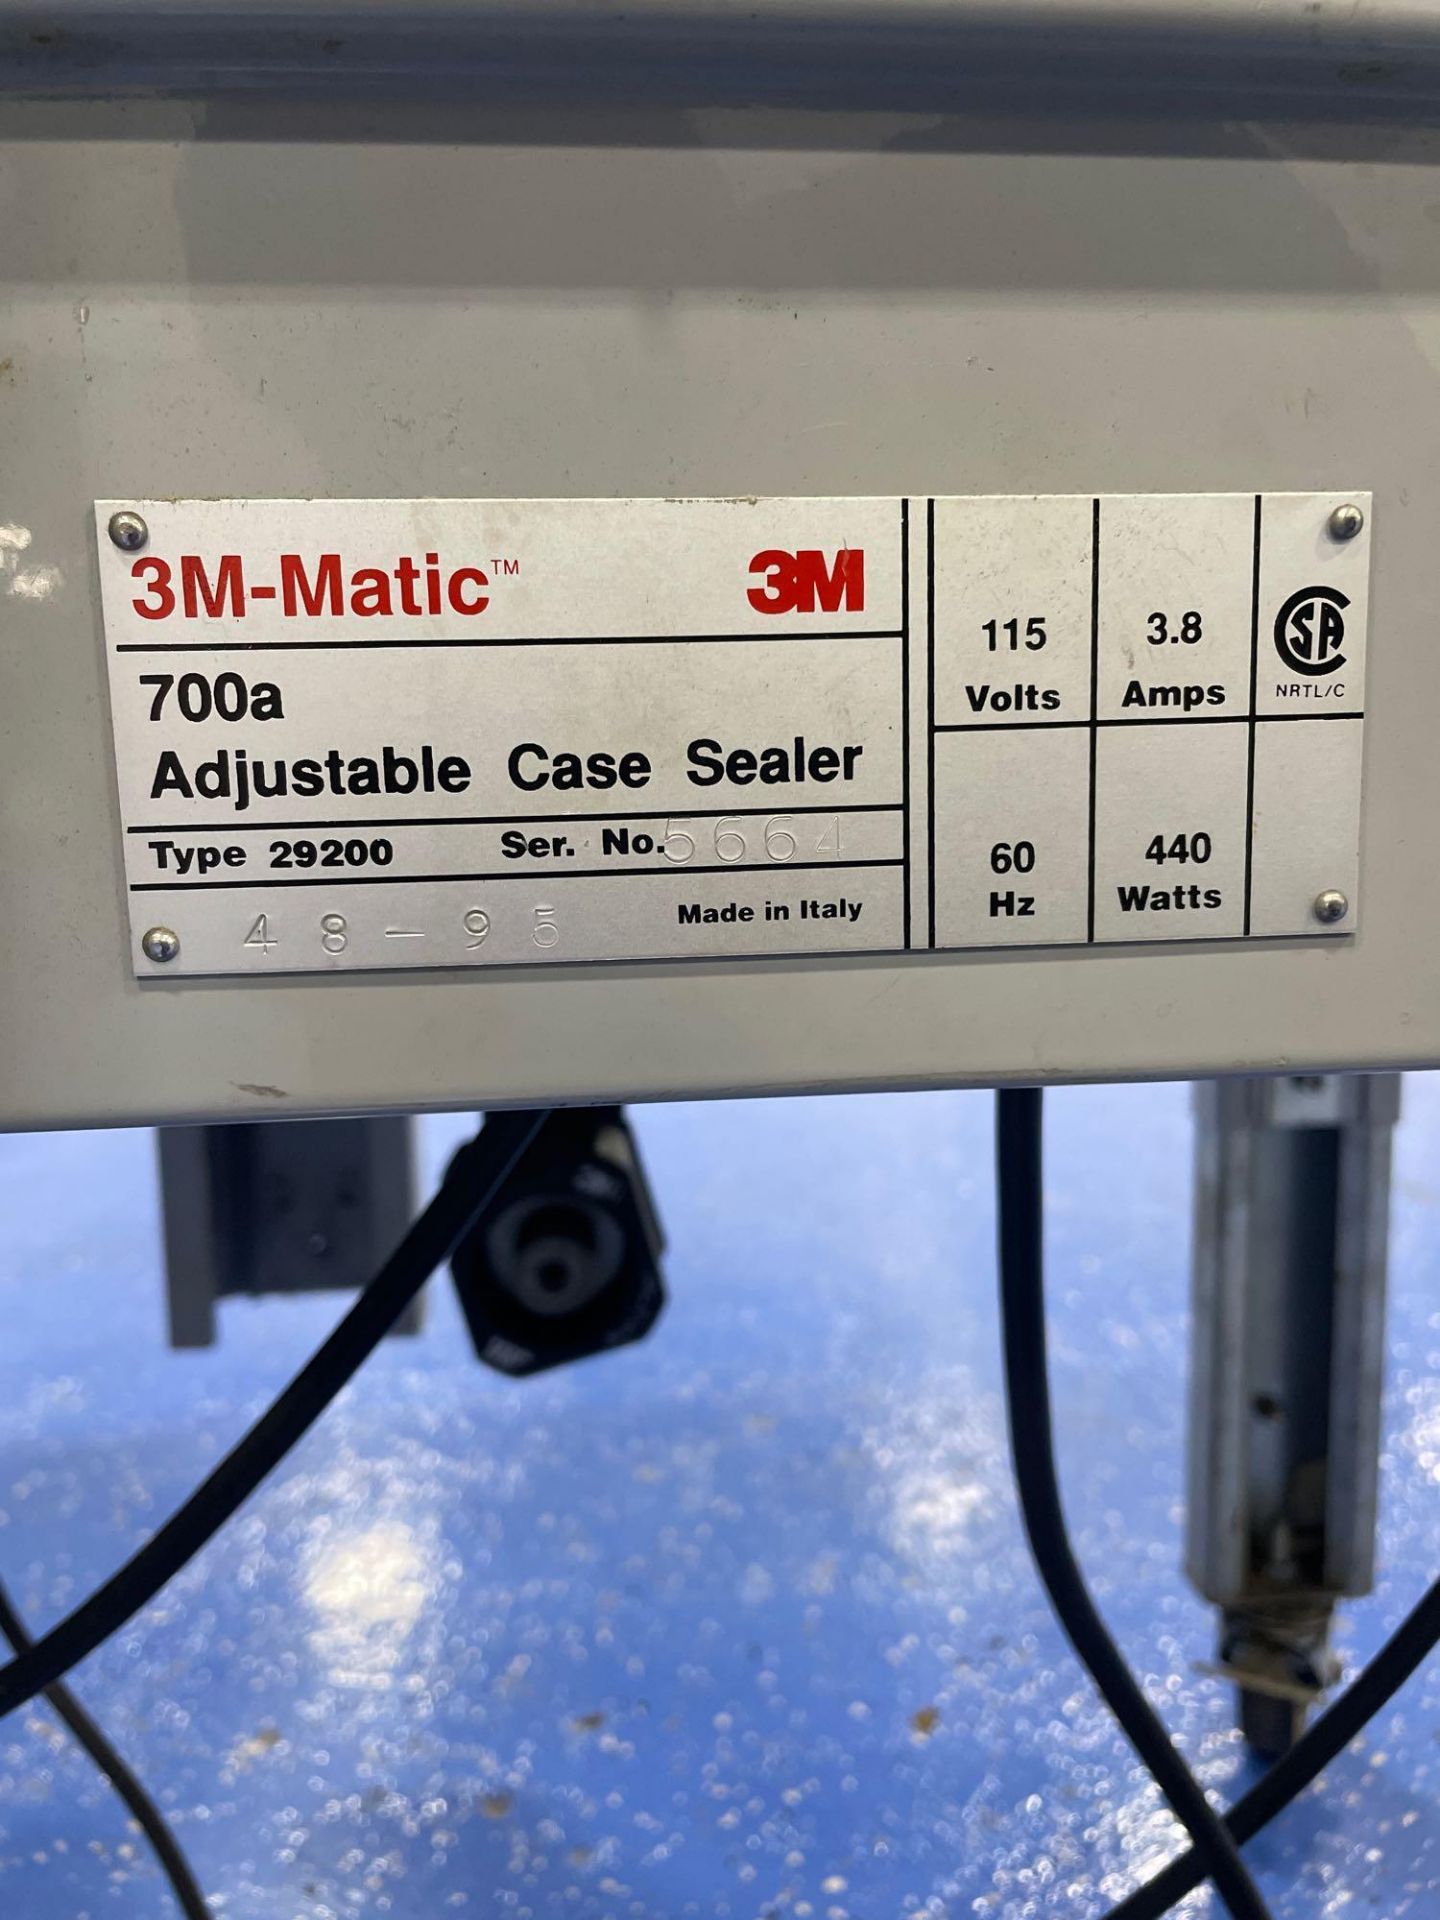 3M Matic 700a Adjustable Top and Bottom Case Sealer - Image 12 of 13